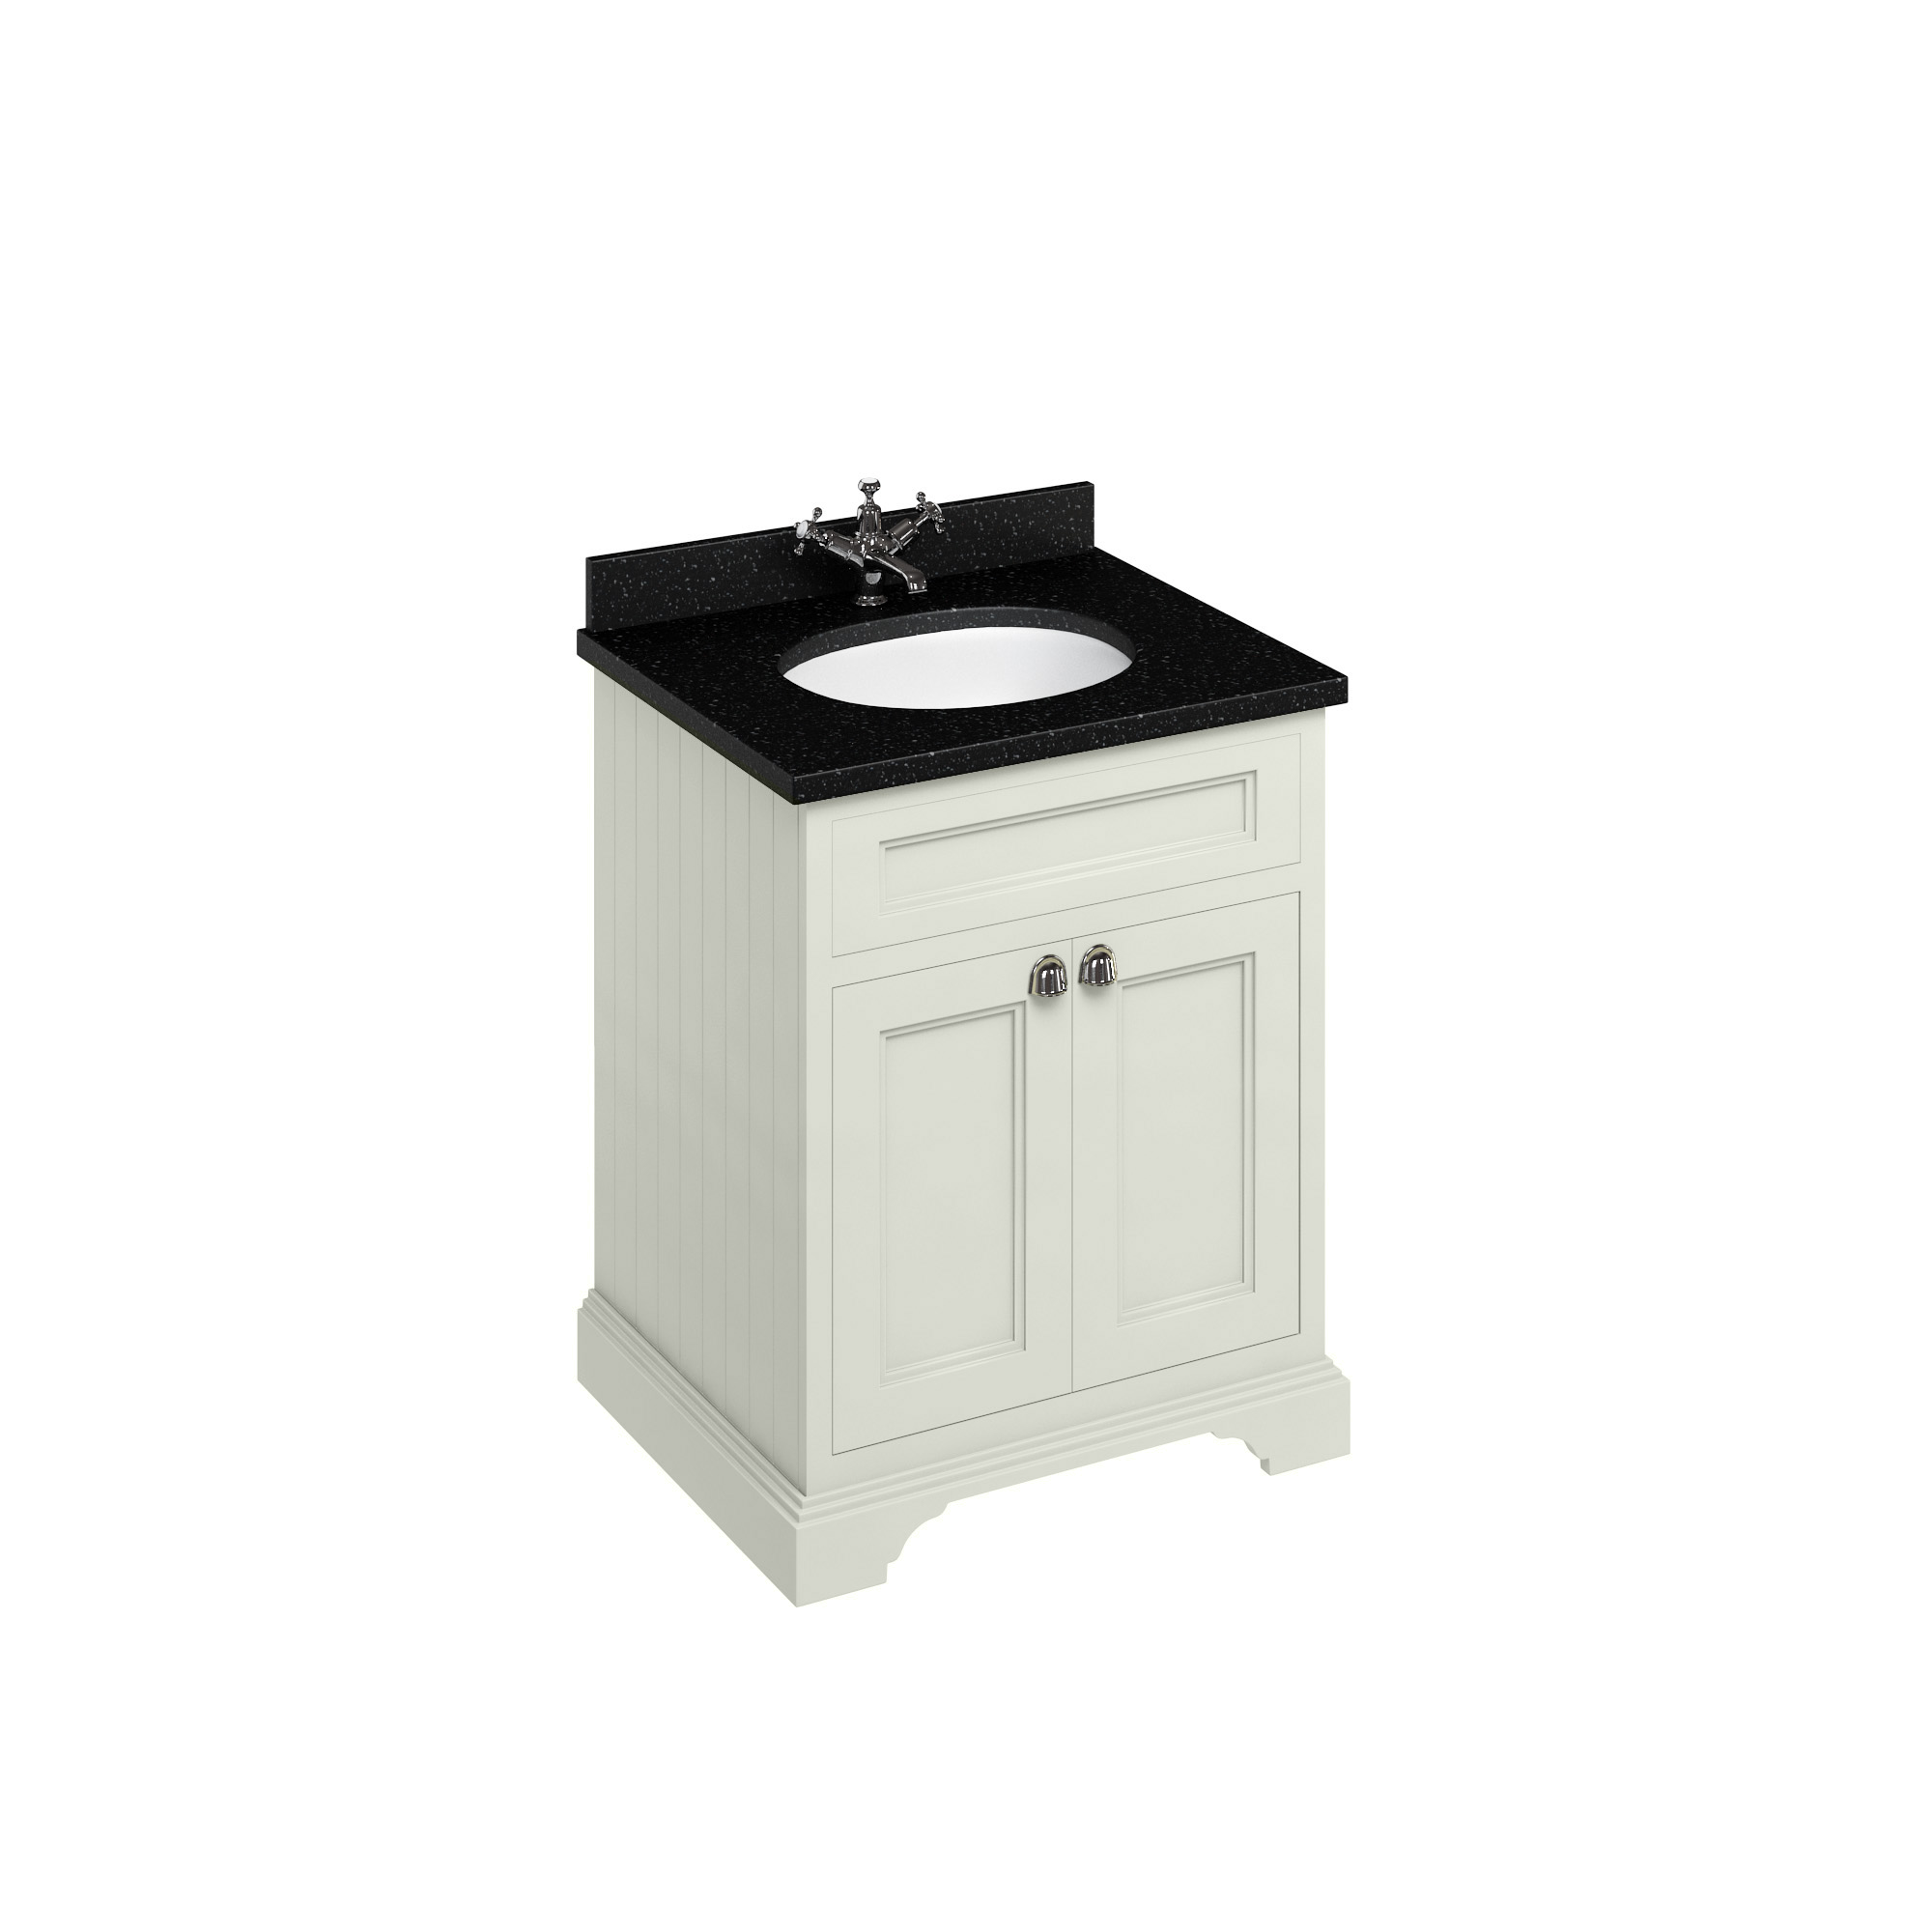 Freestanding 65 Vanity Unit with doors - Sand and Minerva black granite worktop with integrated white basin